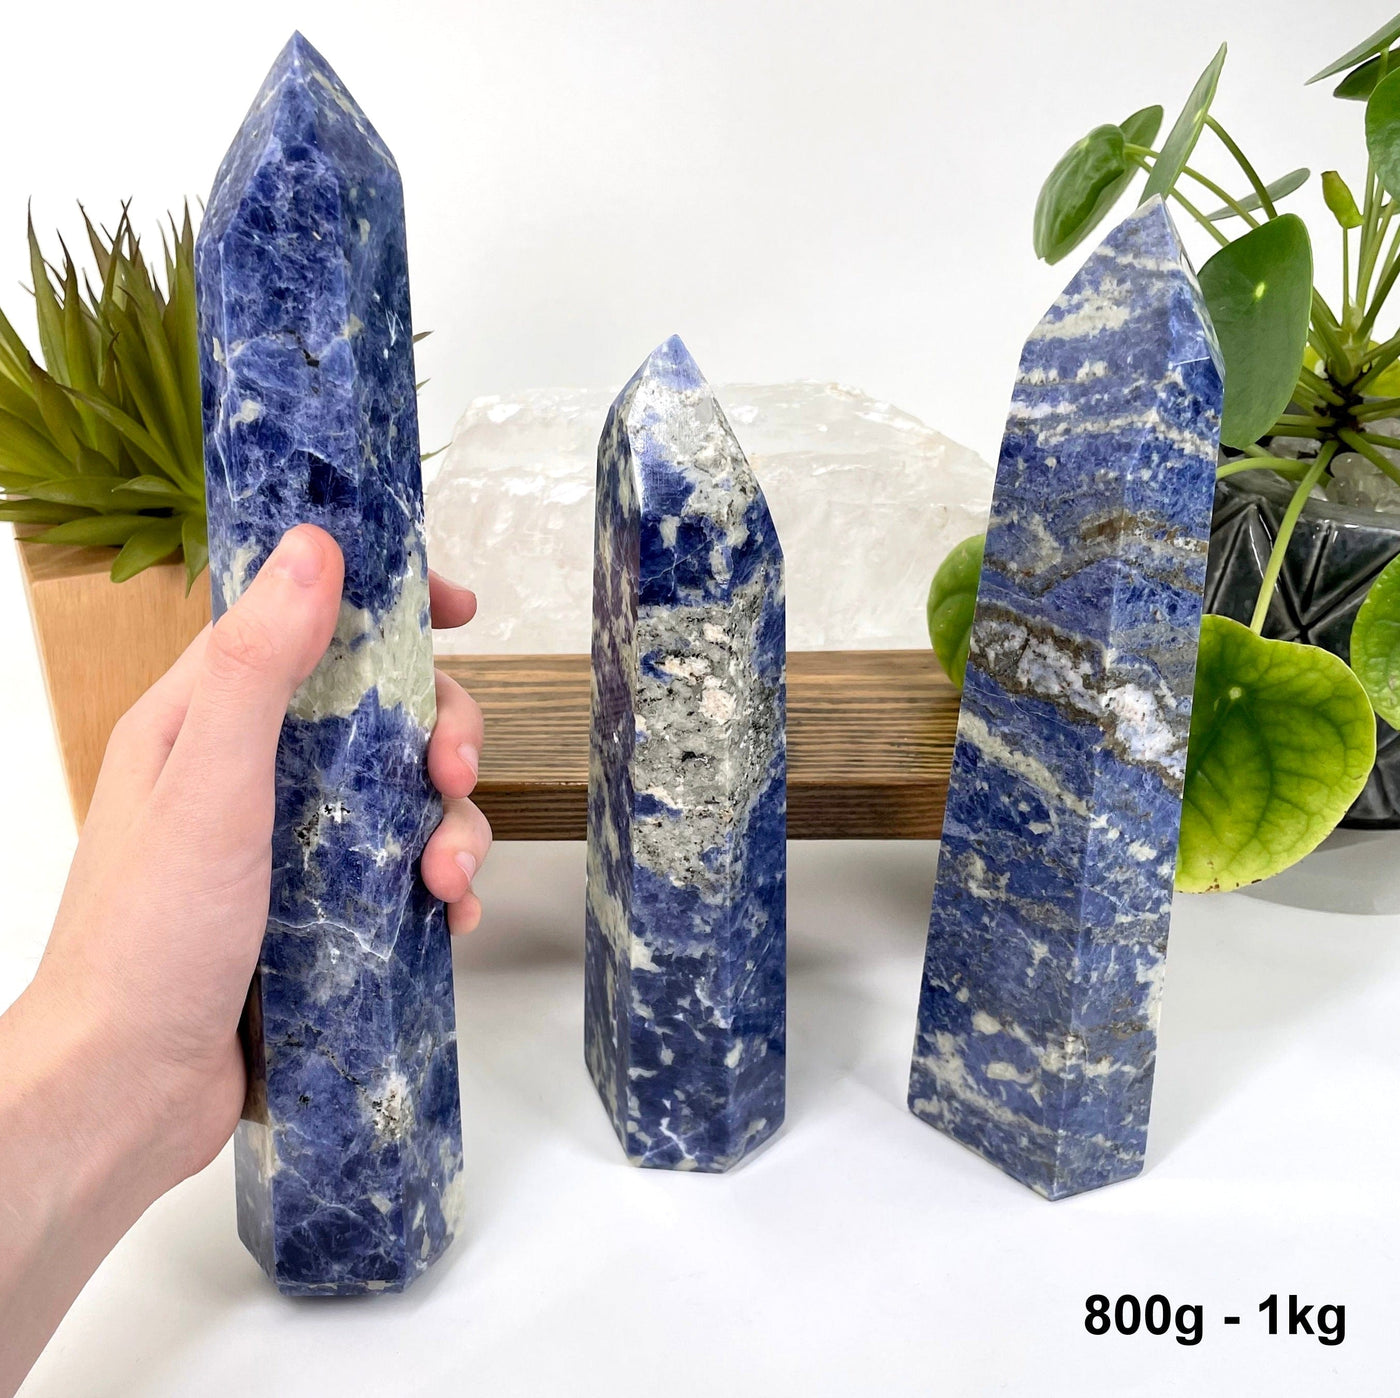 one 800g - 1kg sodalite polished point in hand for size reference with two others on display for possible variations